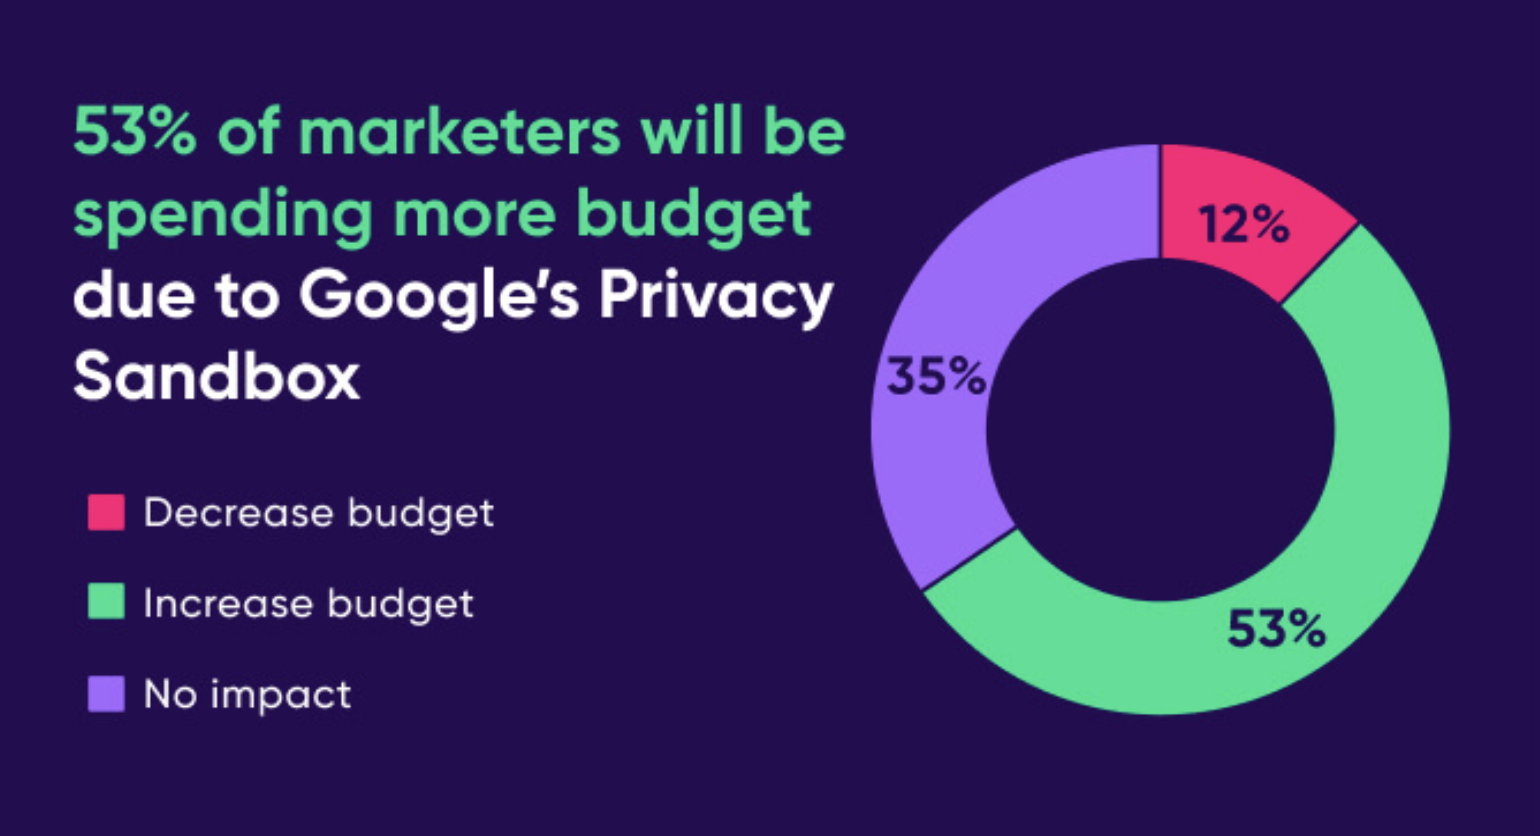 A pie chart showing 53% of marketers spending more budget. 